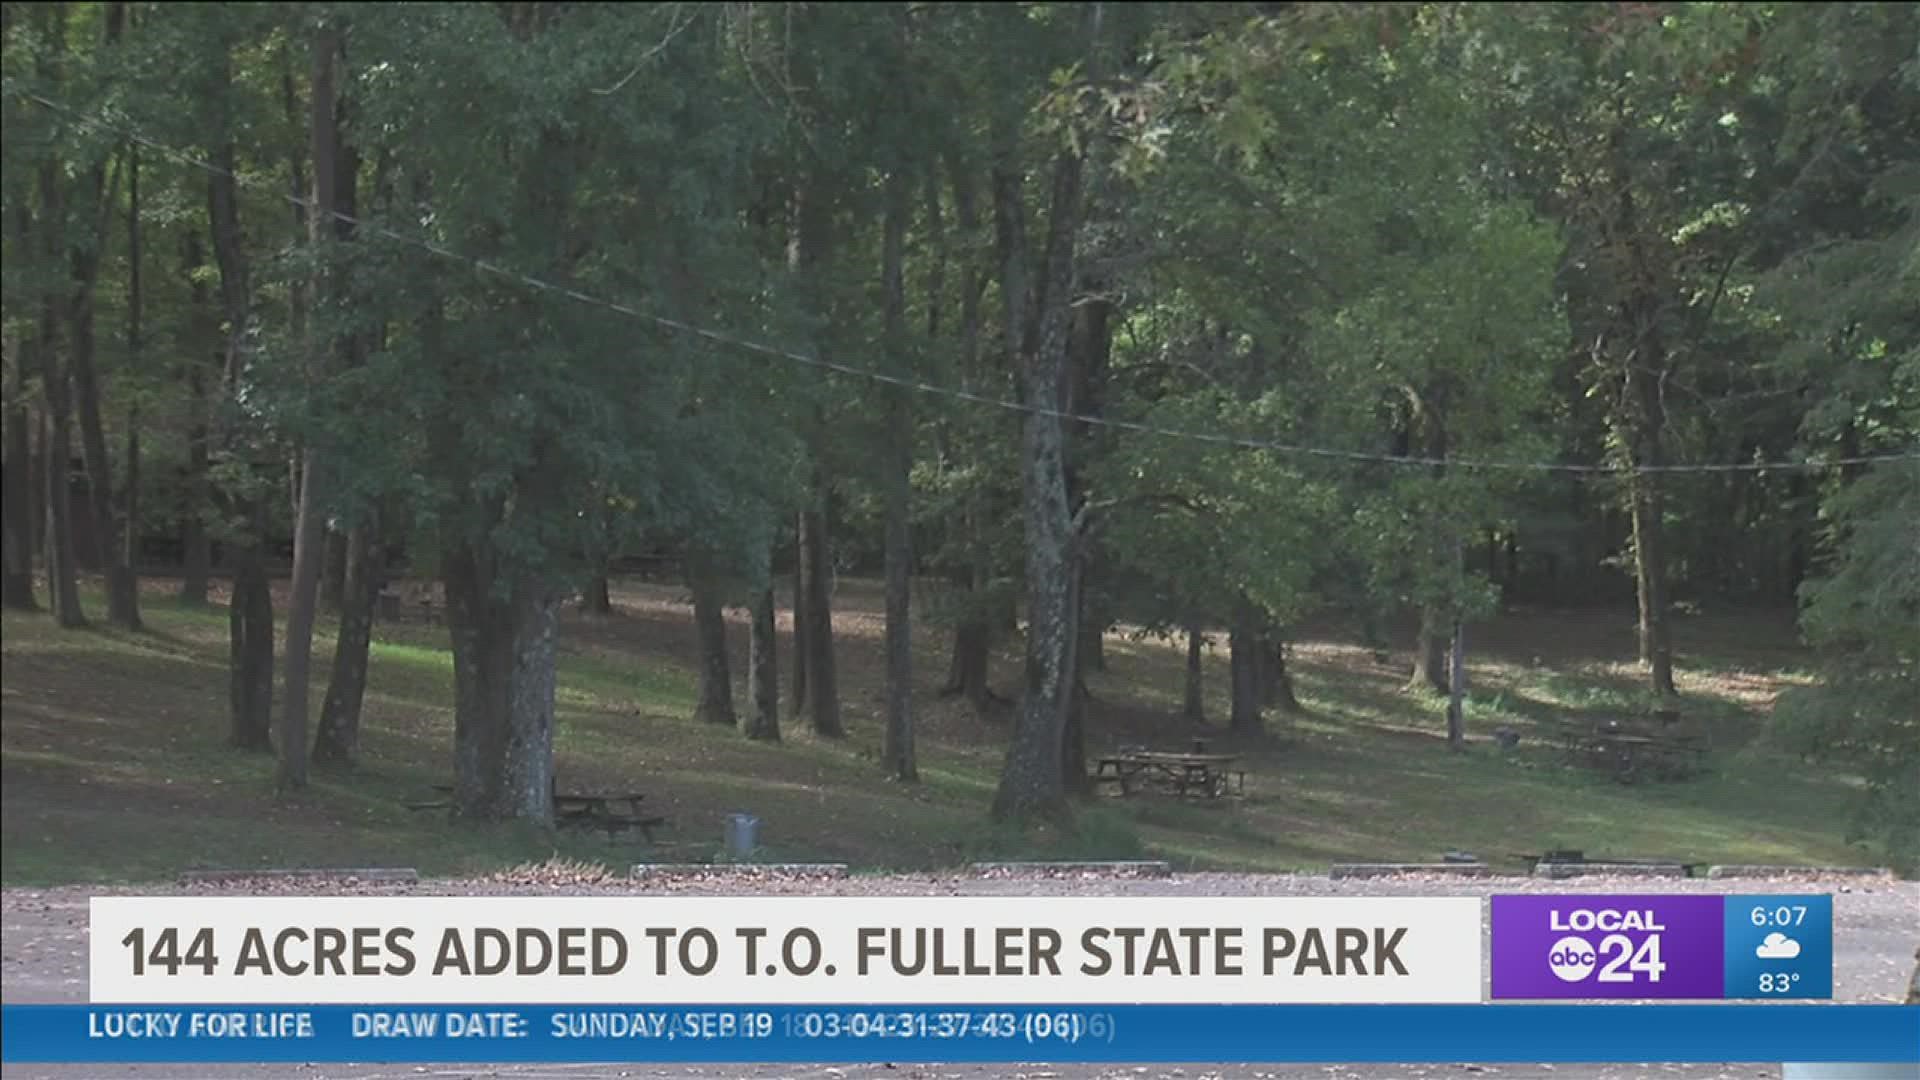 The park is known for being the first one east of the Mississippi River to be open to African Americans.